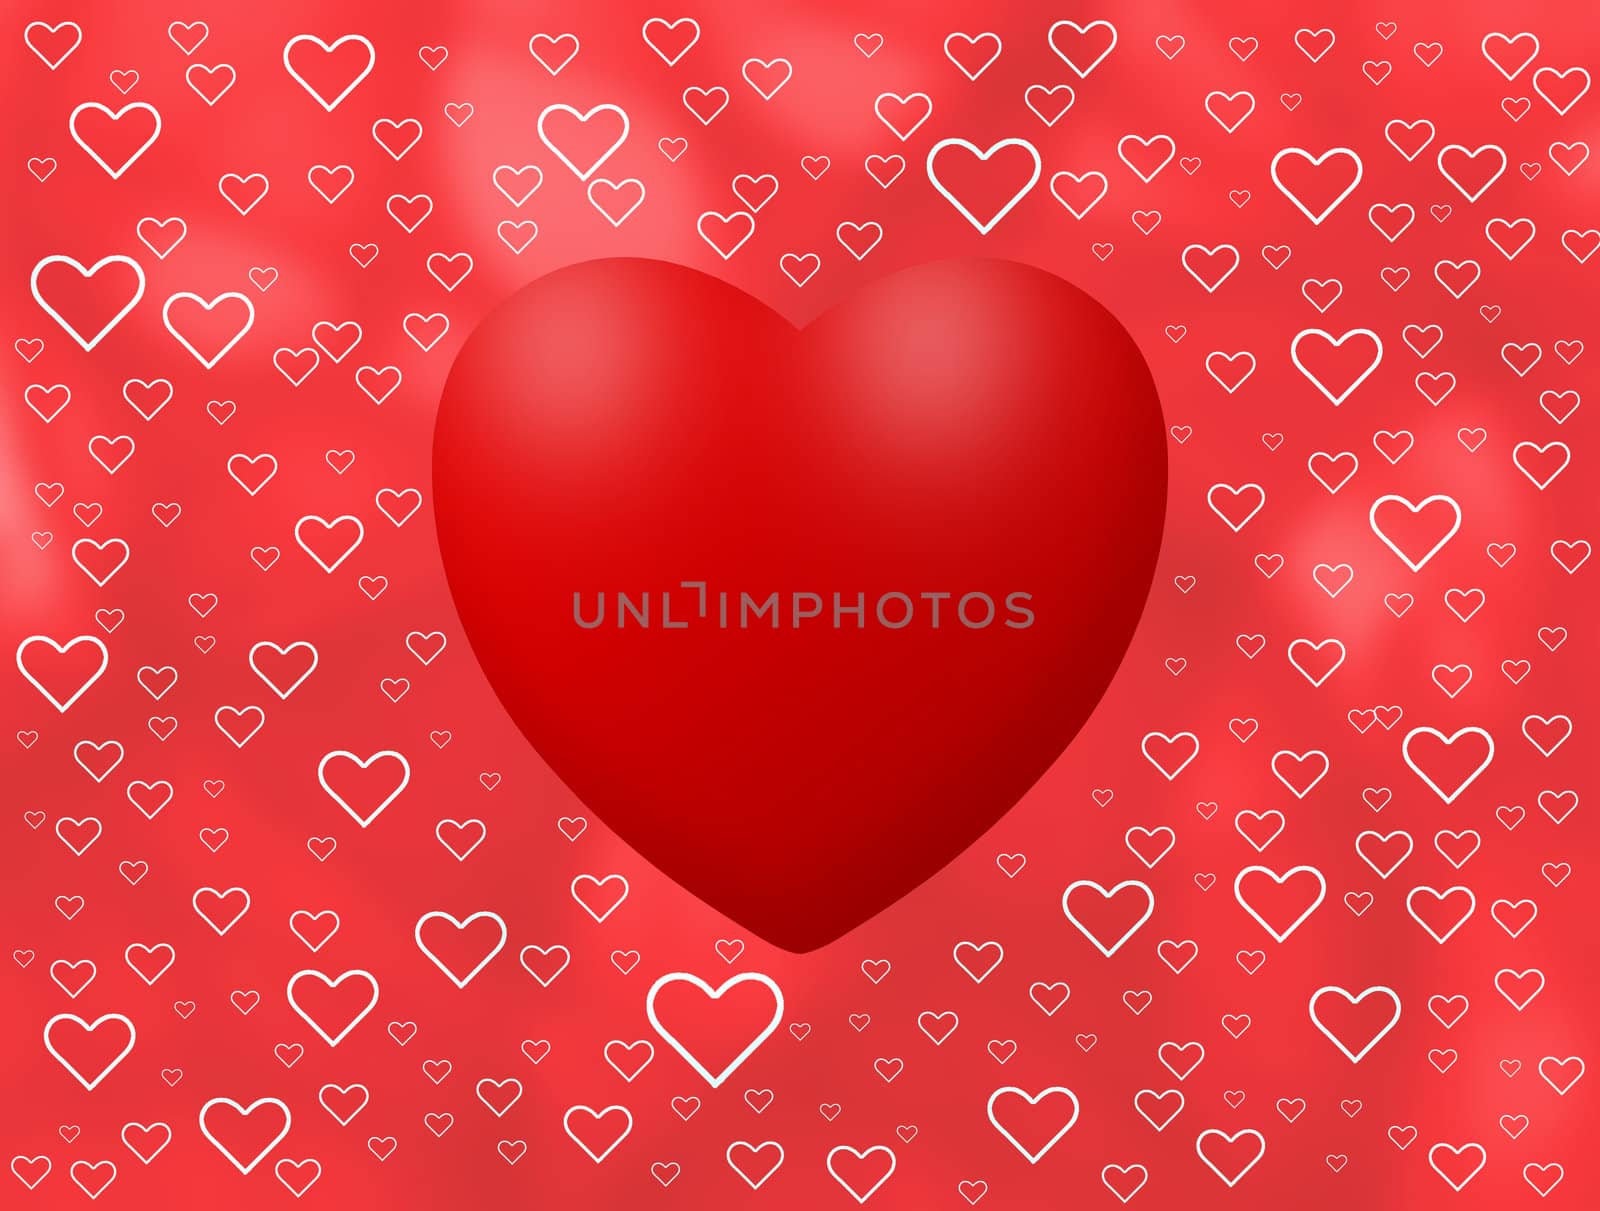 Love background with hearts by Sevaljevic